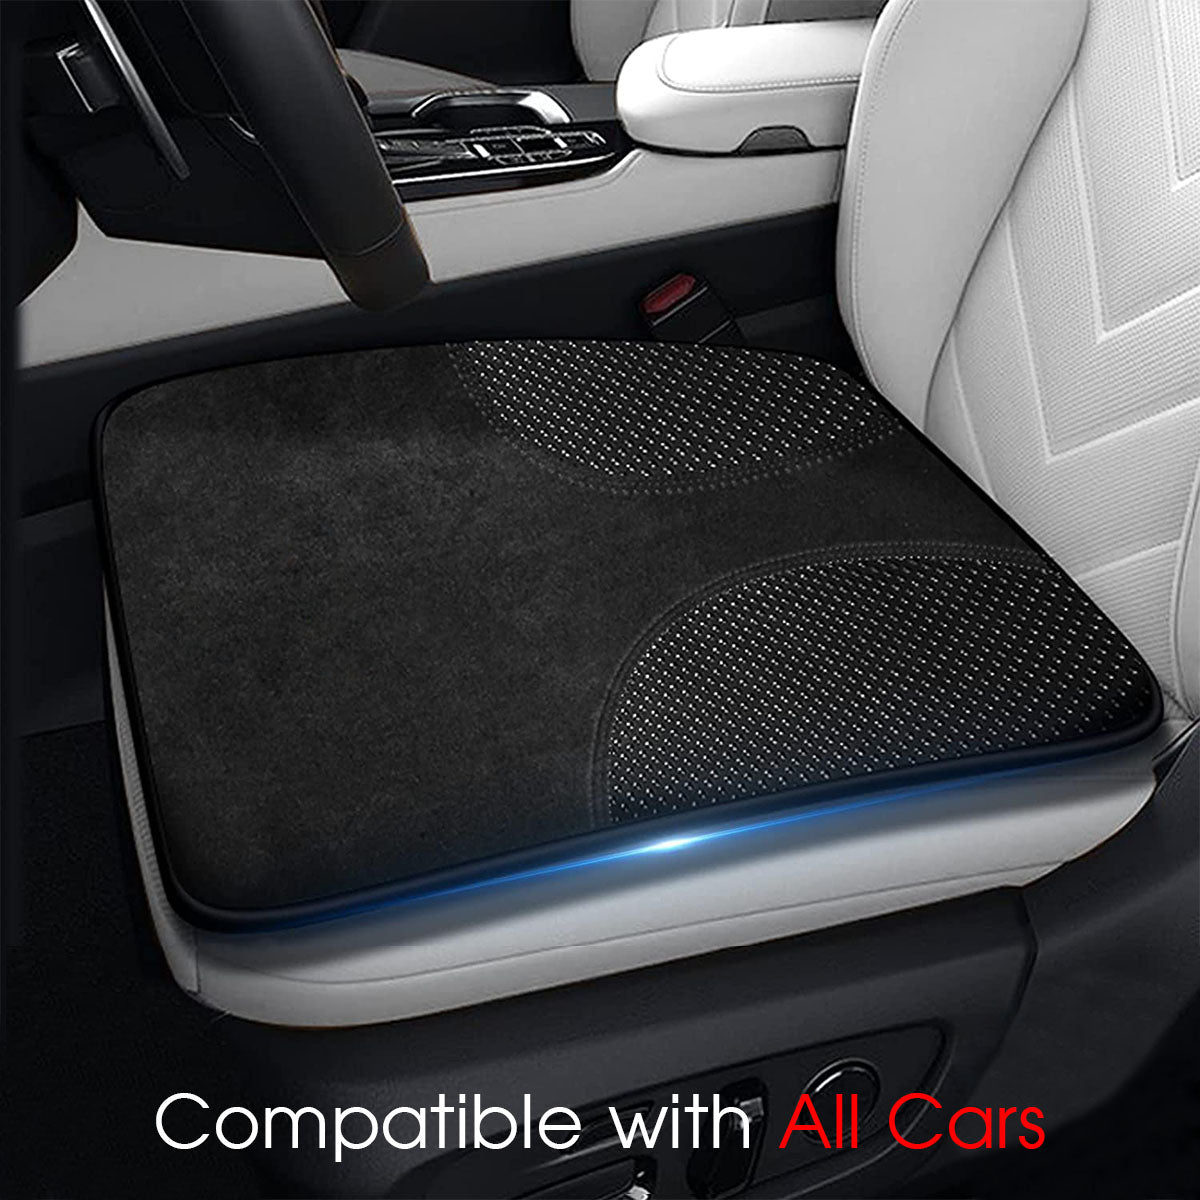 Car Seat Cushion, Custom Fit For Your Cars, Double Sided Seat Cushion, Breathable Suede + Ice Silk Car Seat Cushion, Comfort Seat Covers Cushion JE19979